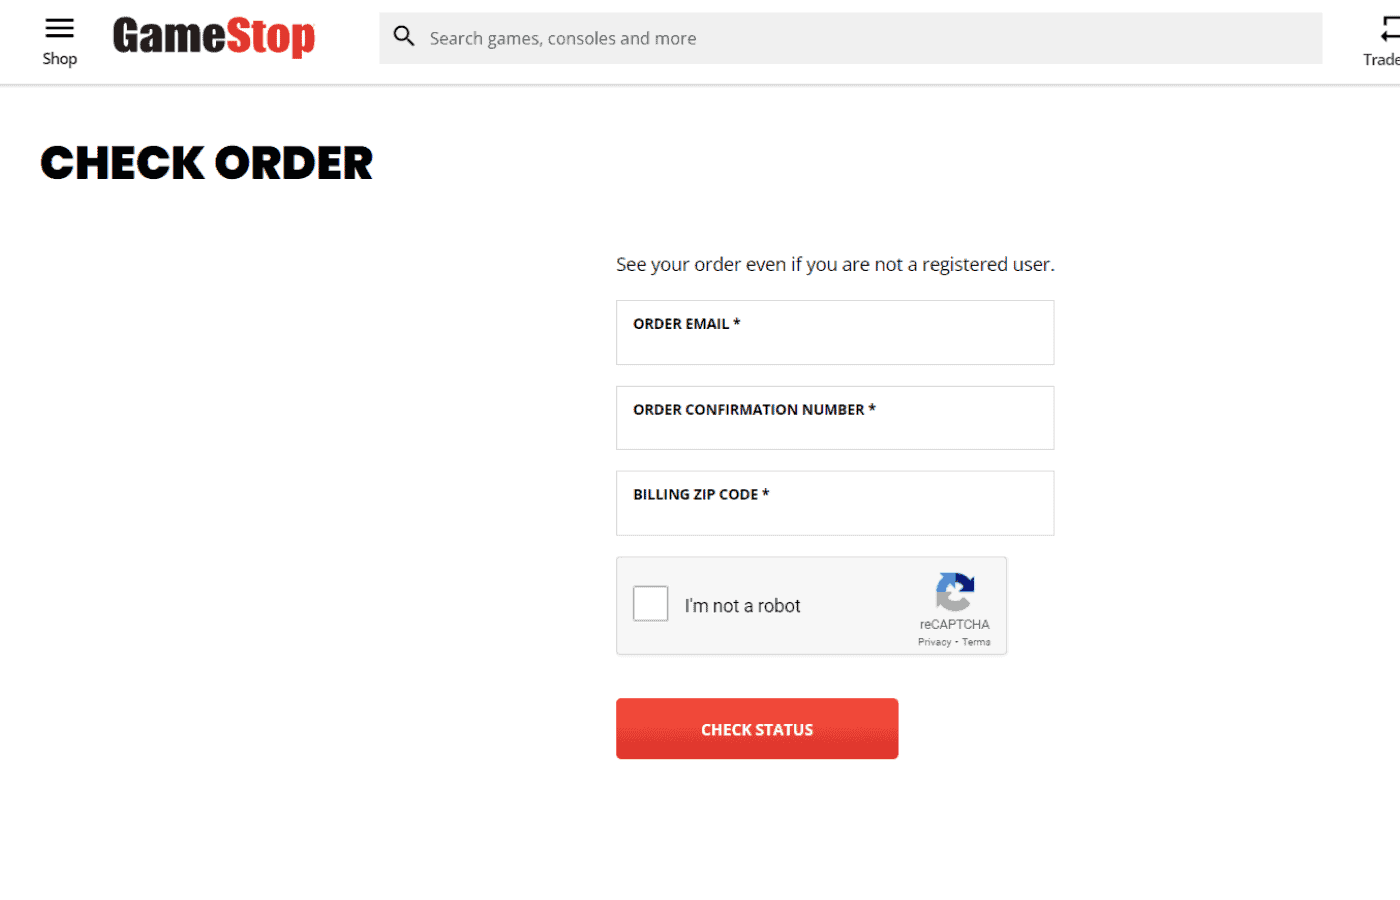 how long does gamestop take to process an order